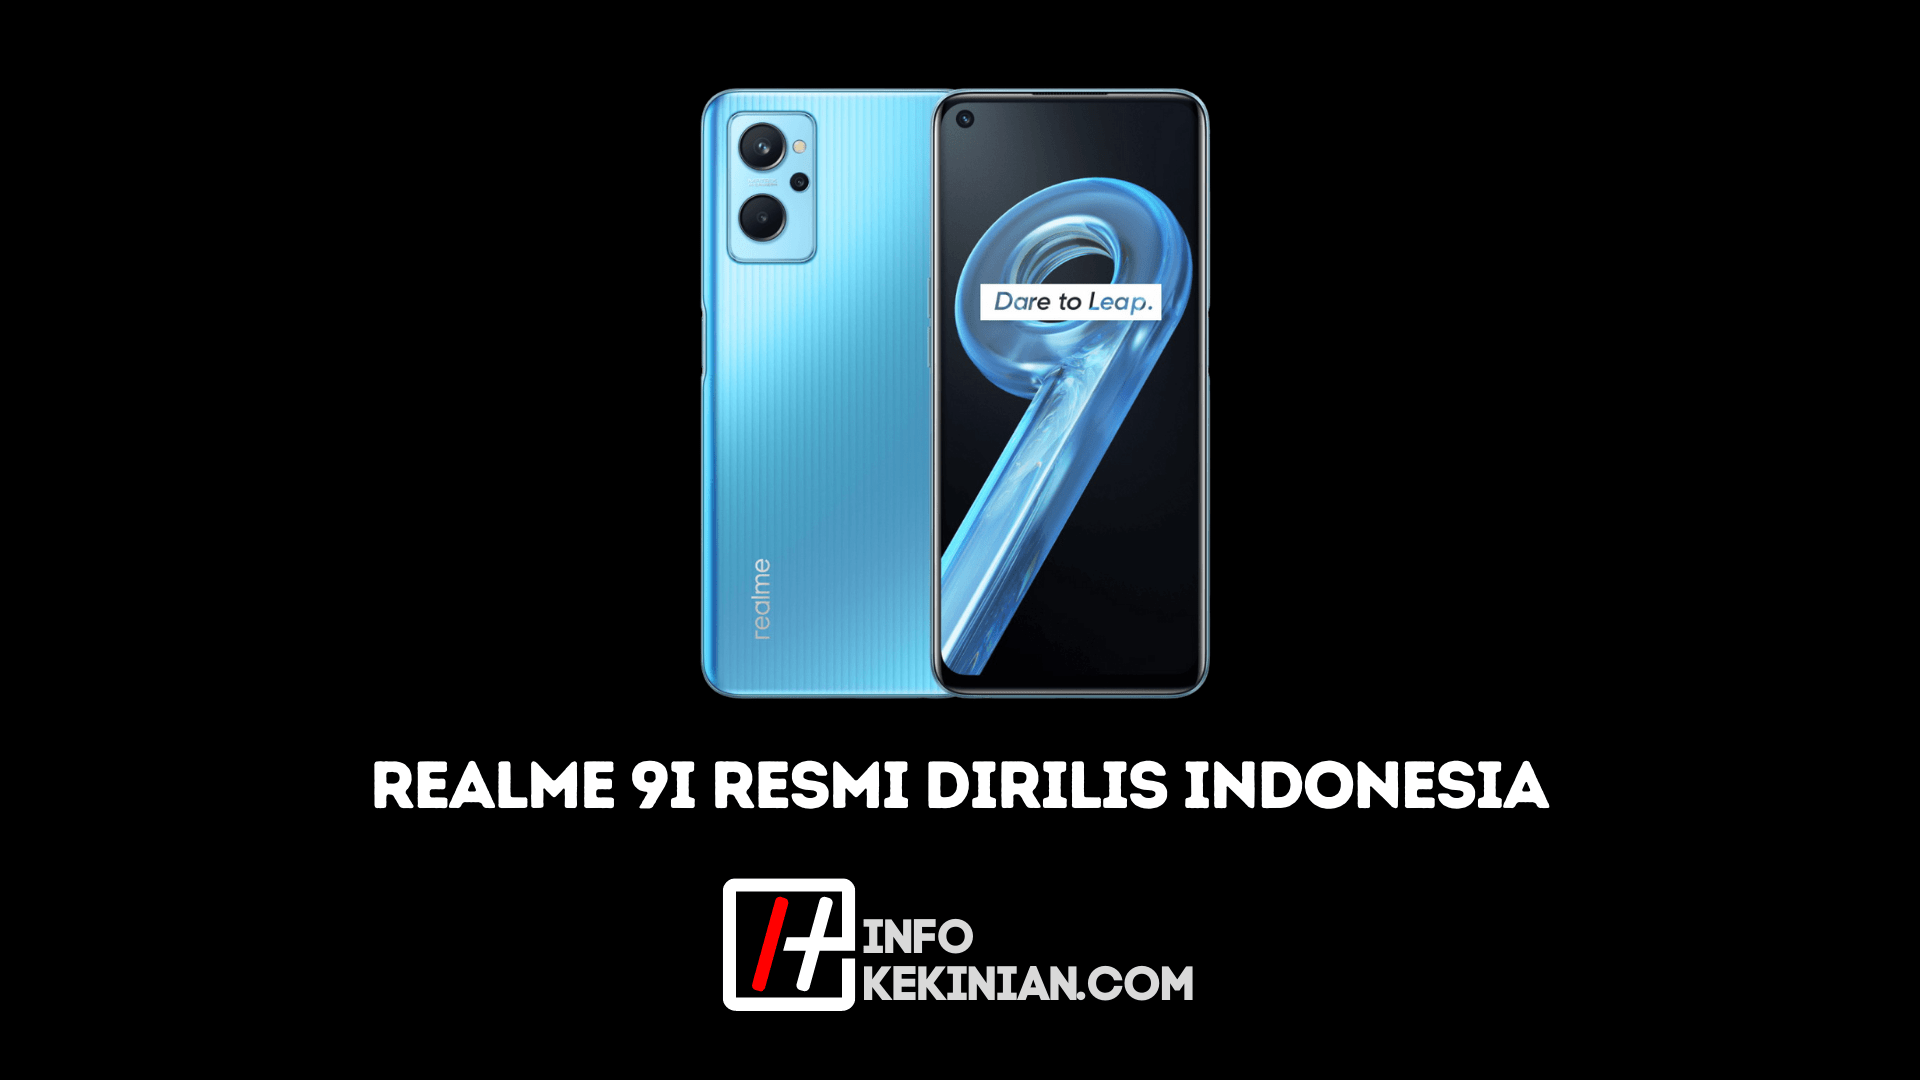 Realme 9i Specifications